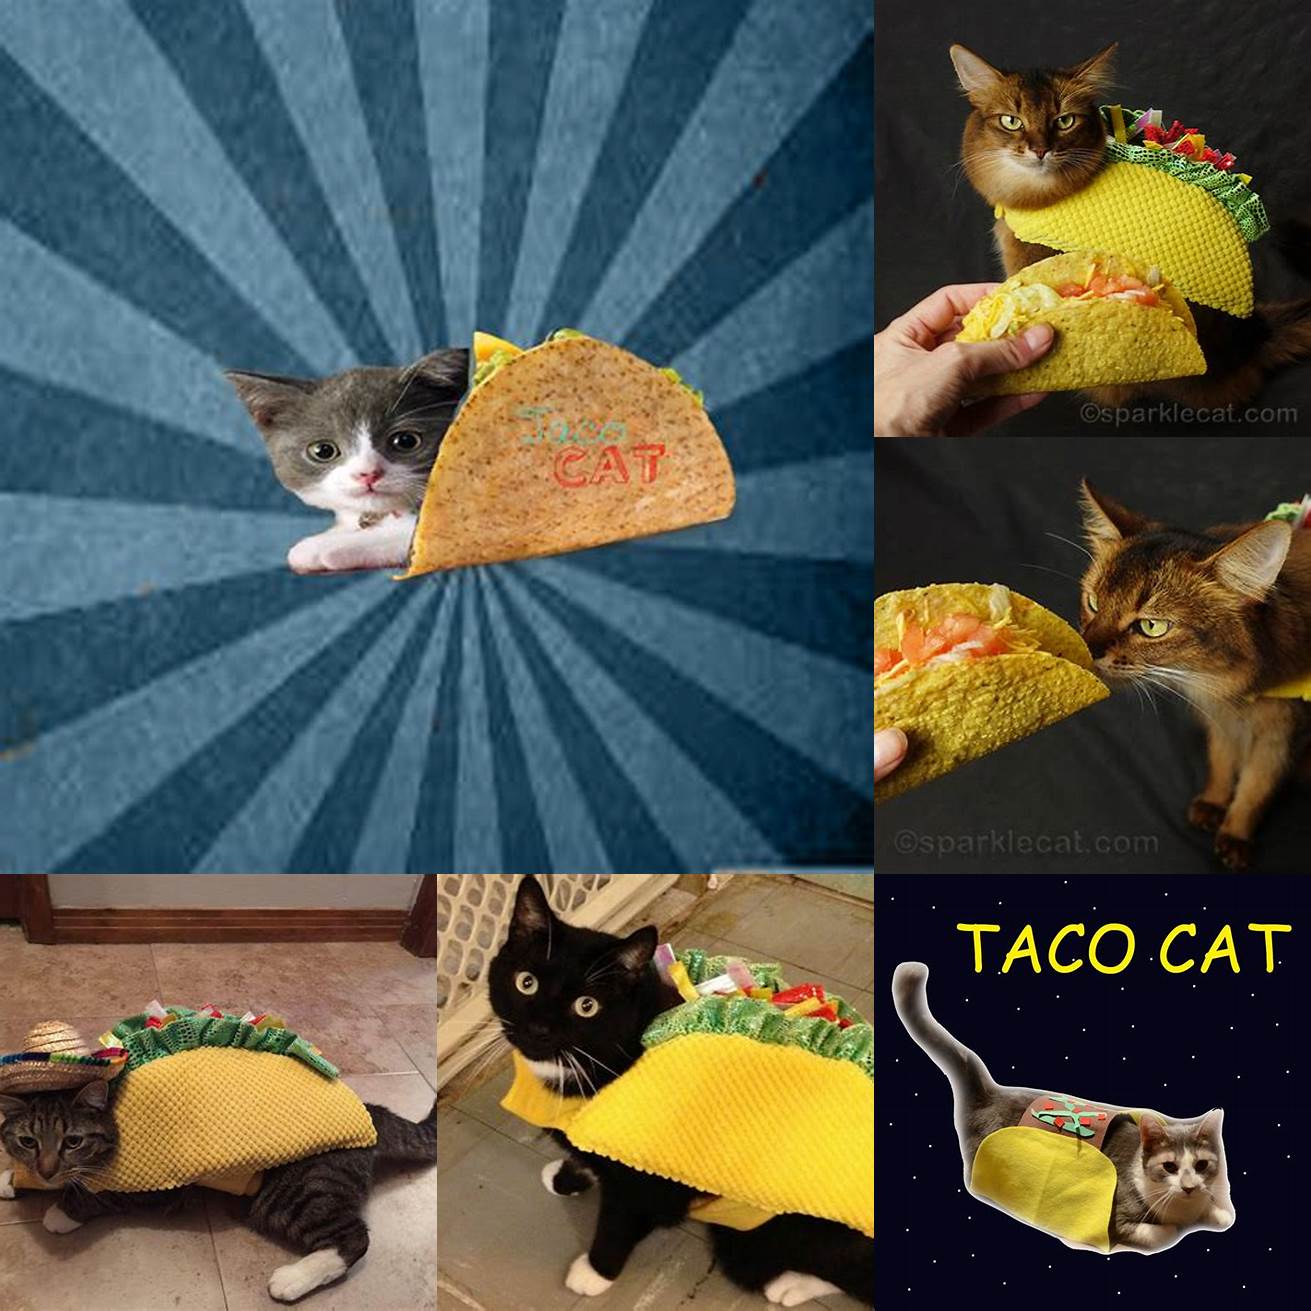 A Cat Holding a Taco in its Mouth